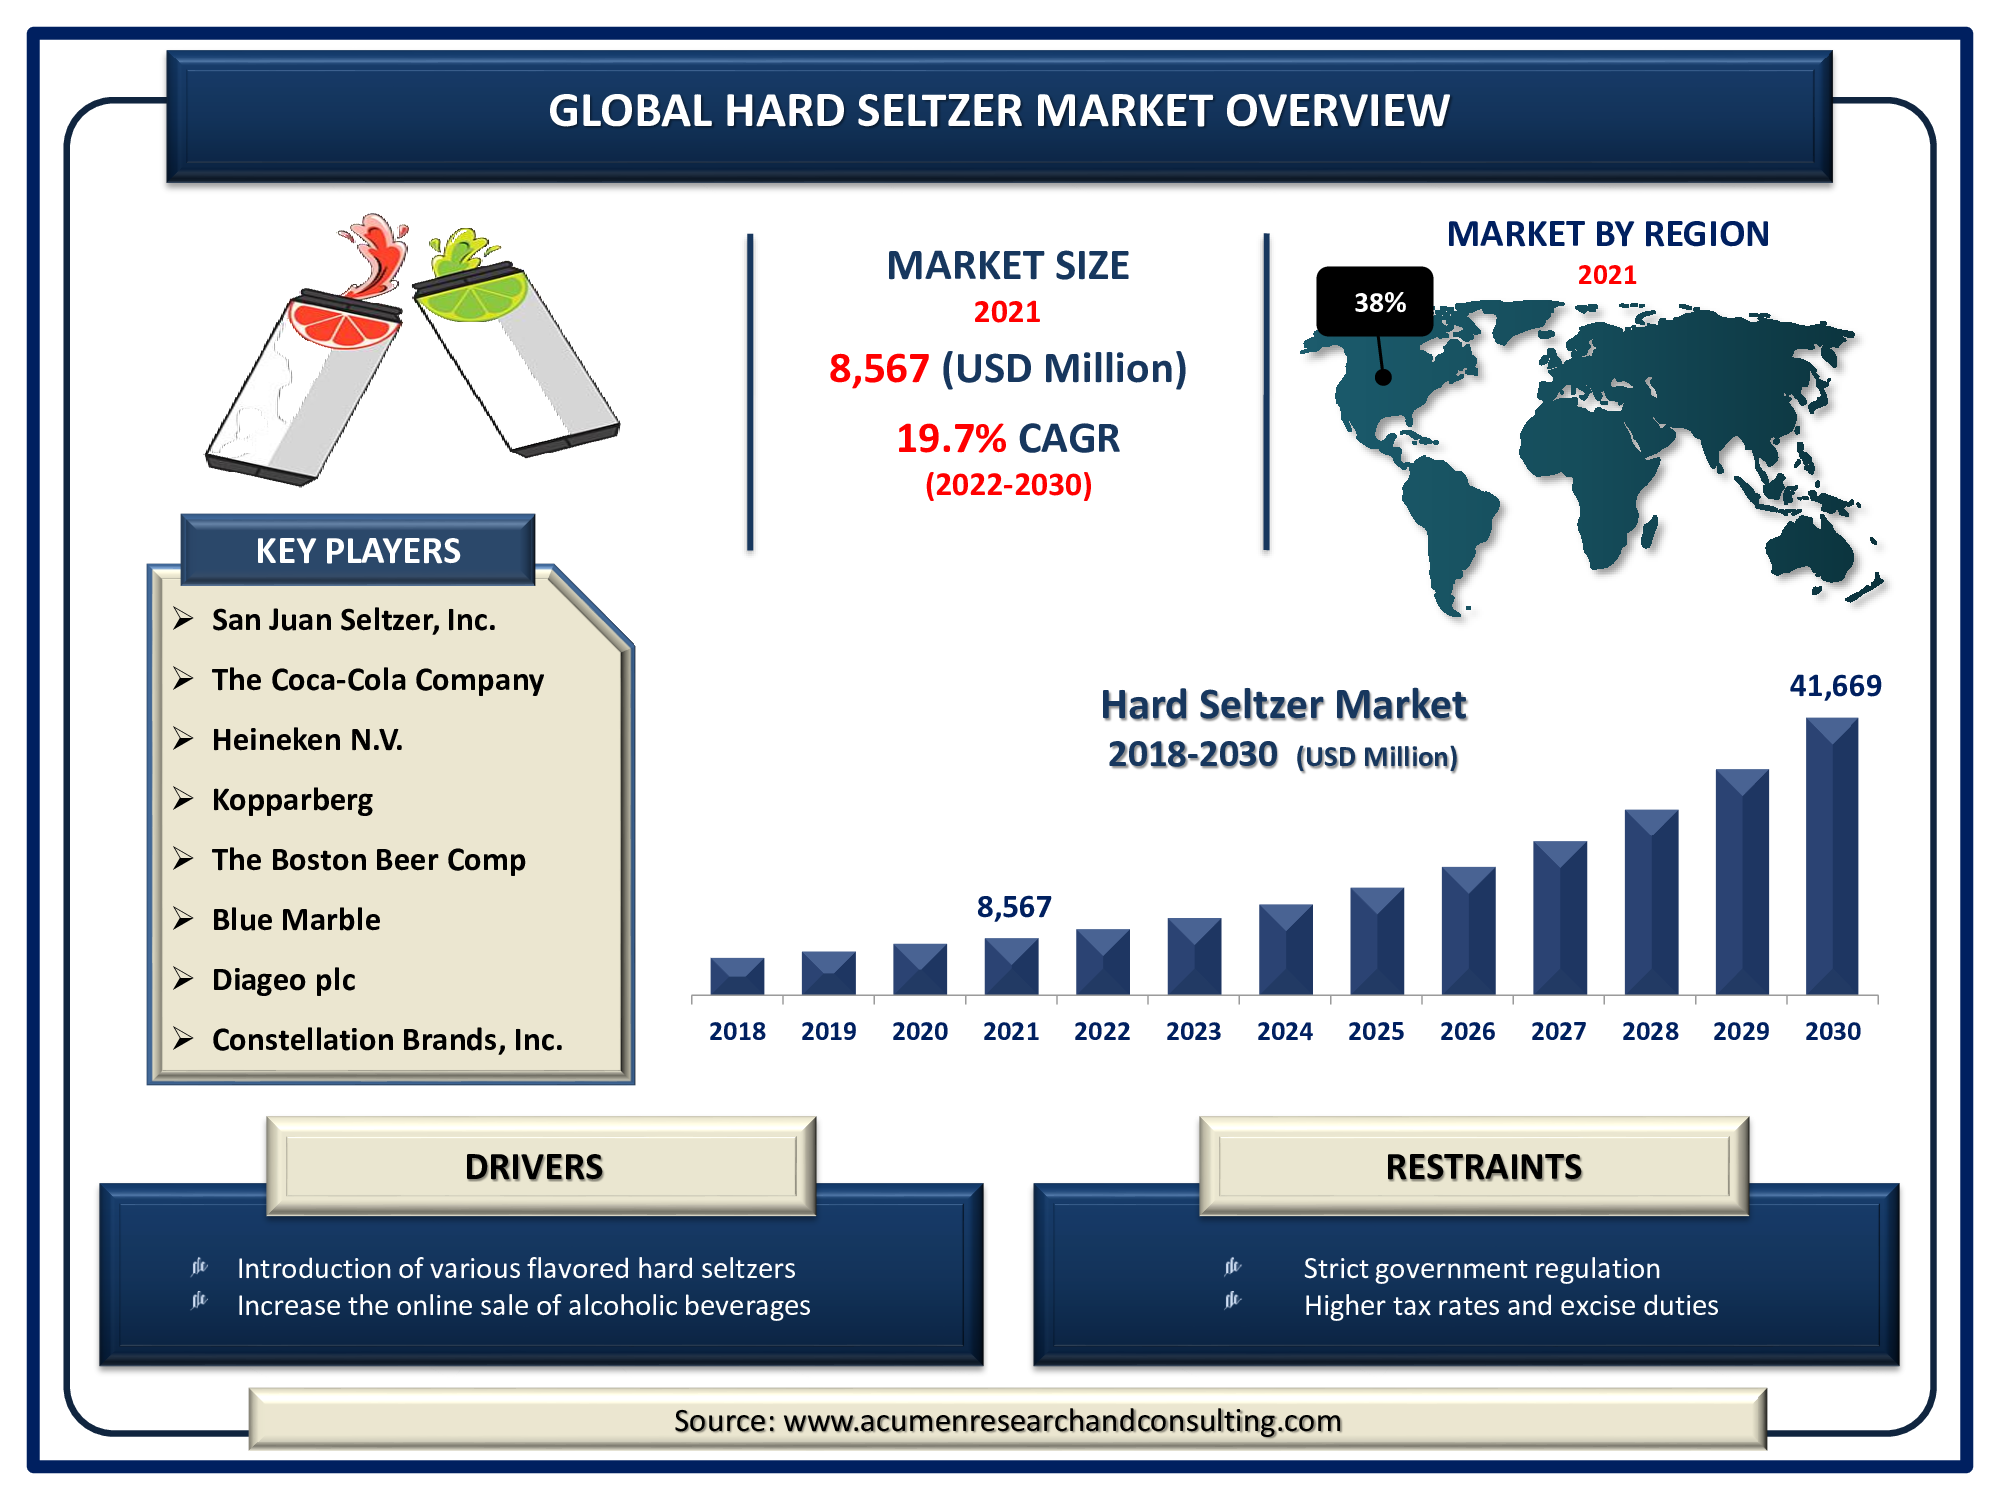 Hard Seltzer Market size accounted for USD 8,567 Million in 2021 and is expected to reach the market value of USD 41,669 Million by 2030 growing at a CAGR of 19.7% during the forecast period from 2022 to 2030.